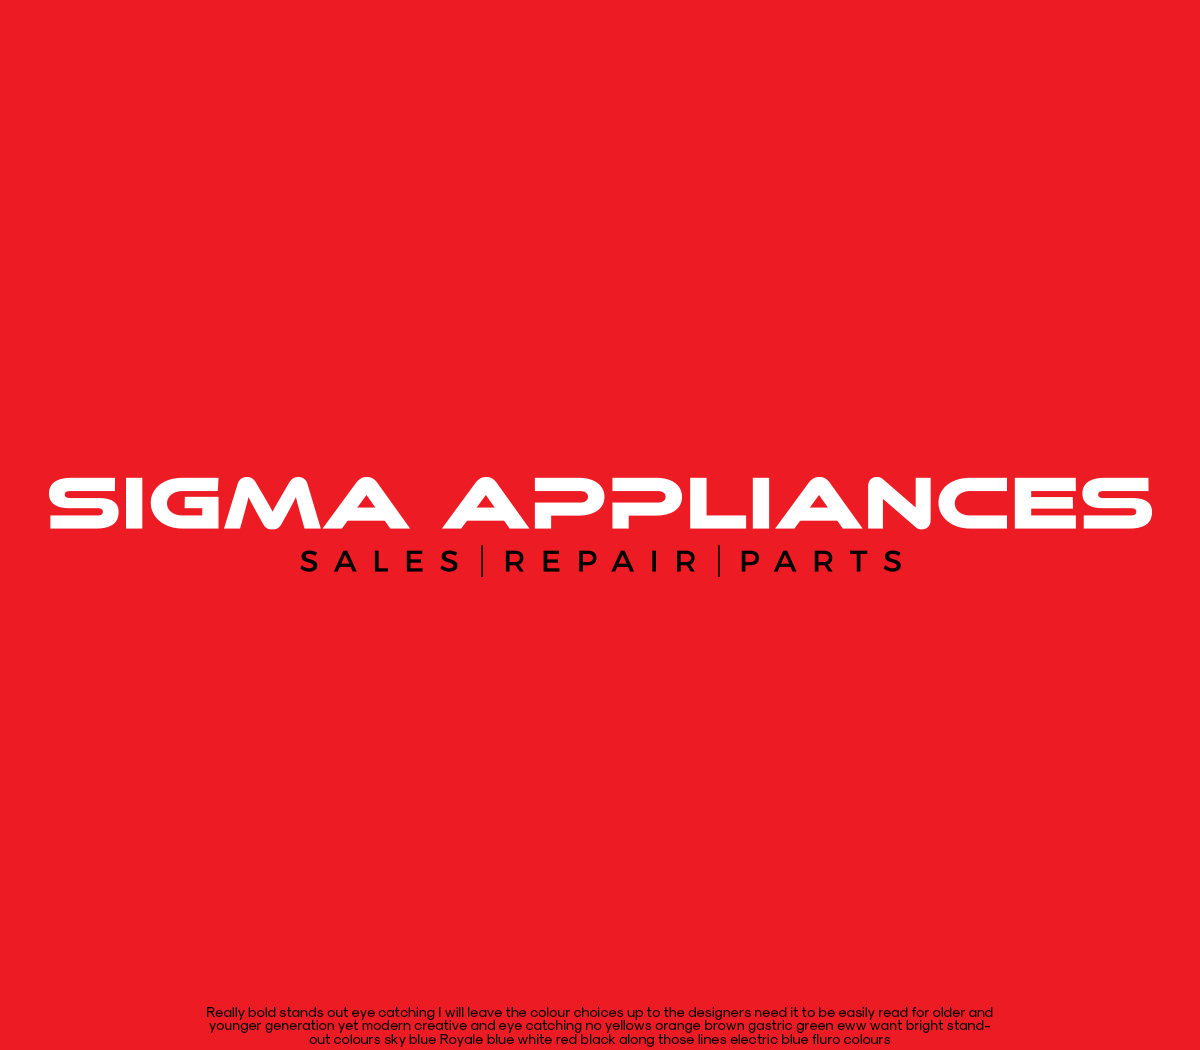 Red and Black Appliance Logo - Elegant, Traditional, Home Appliance Logo Design for Sigma ...